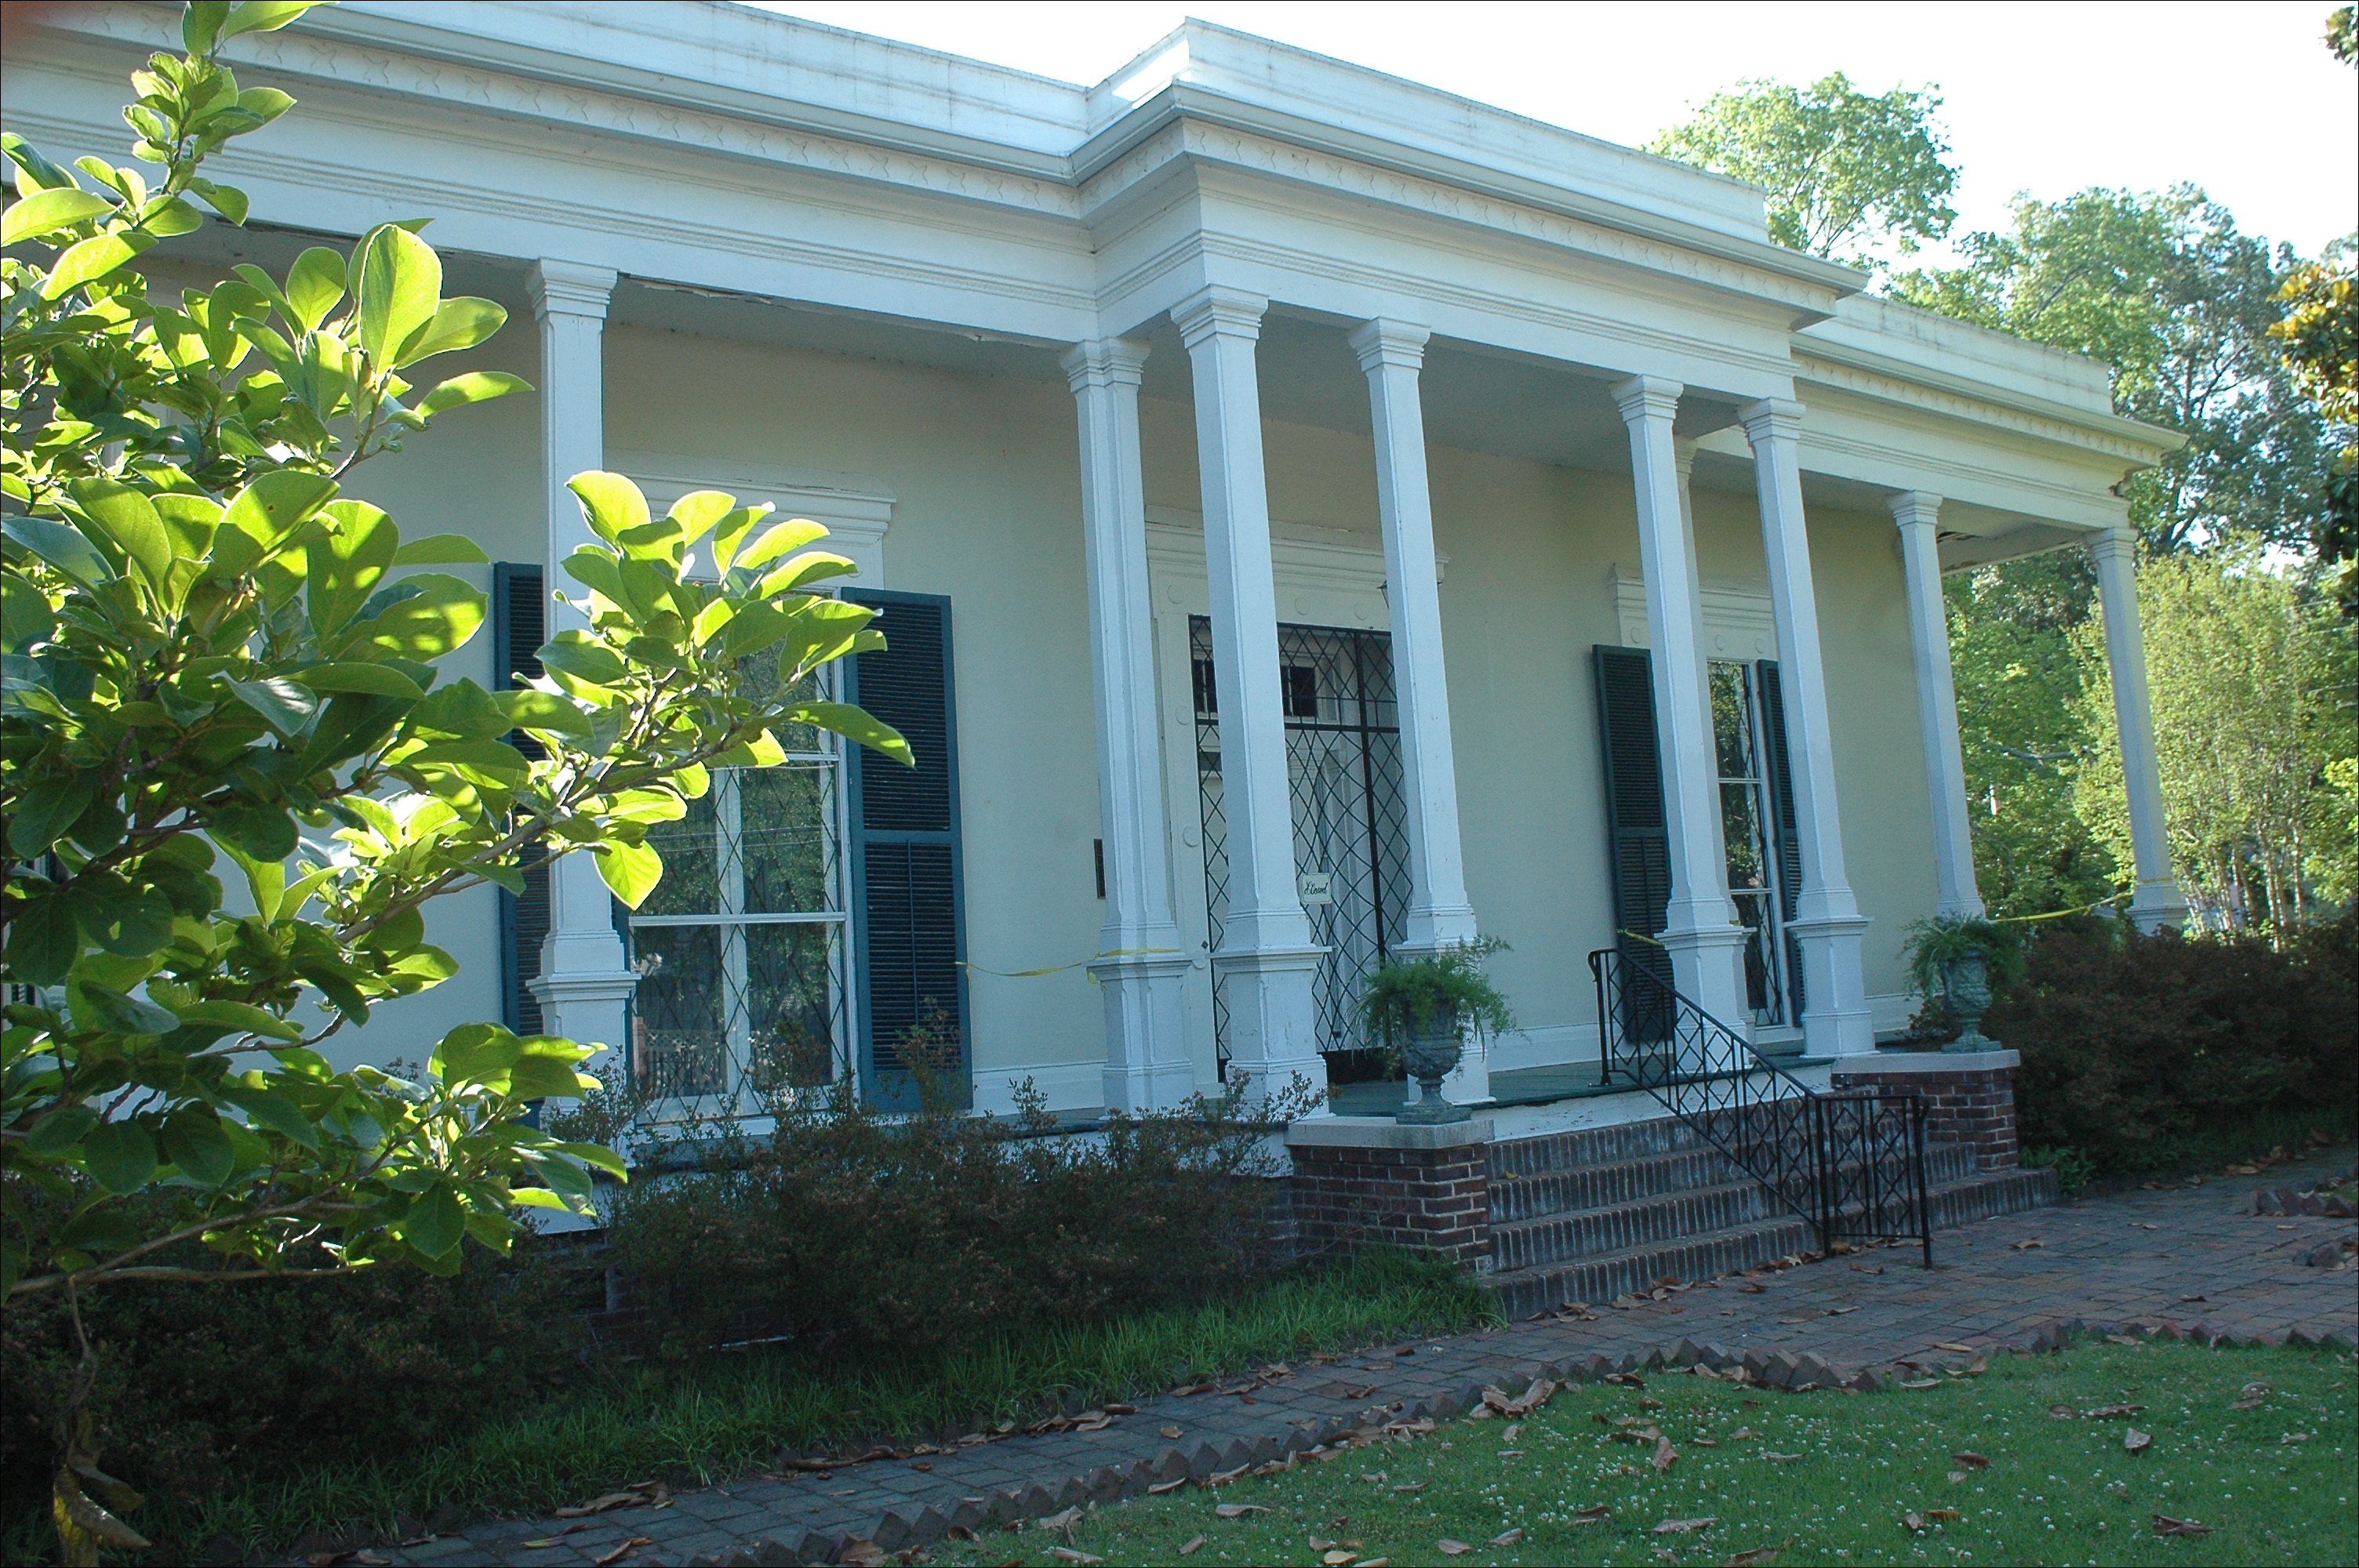 The Verandah House build in 1857, a National Historic Landmark and former headquarters for both Union and Confederate generals. Open to the public. Photo courtesy: The Daily Corinthian